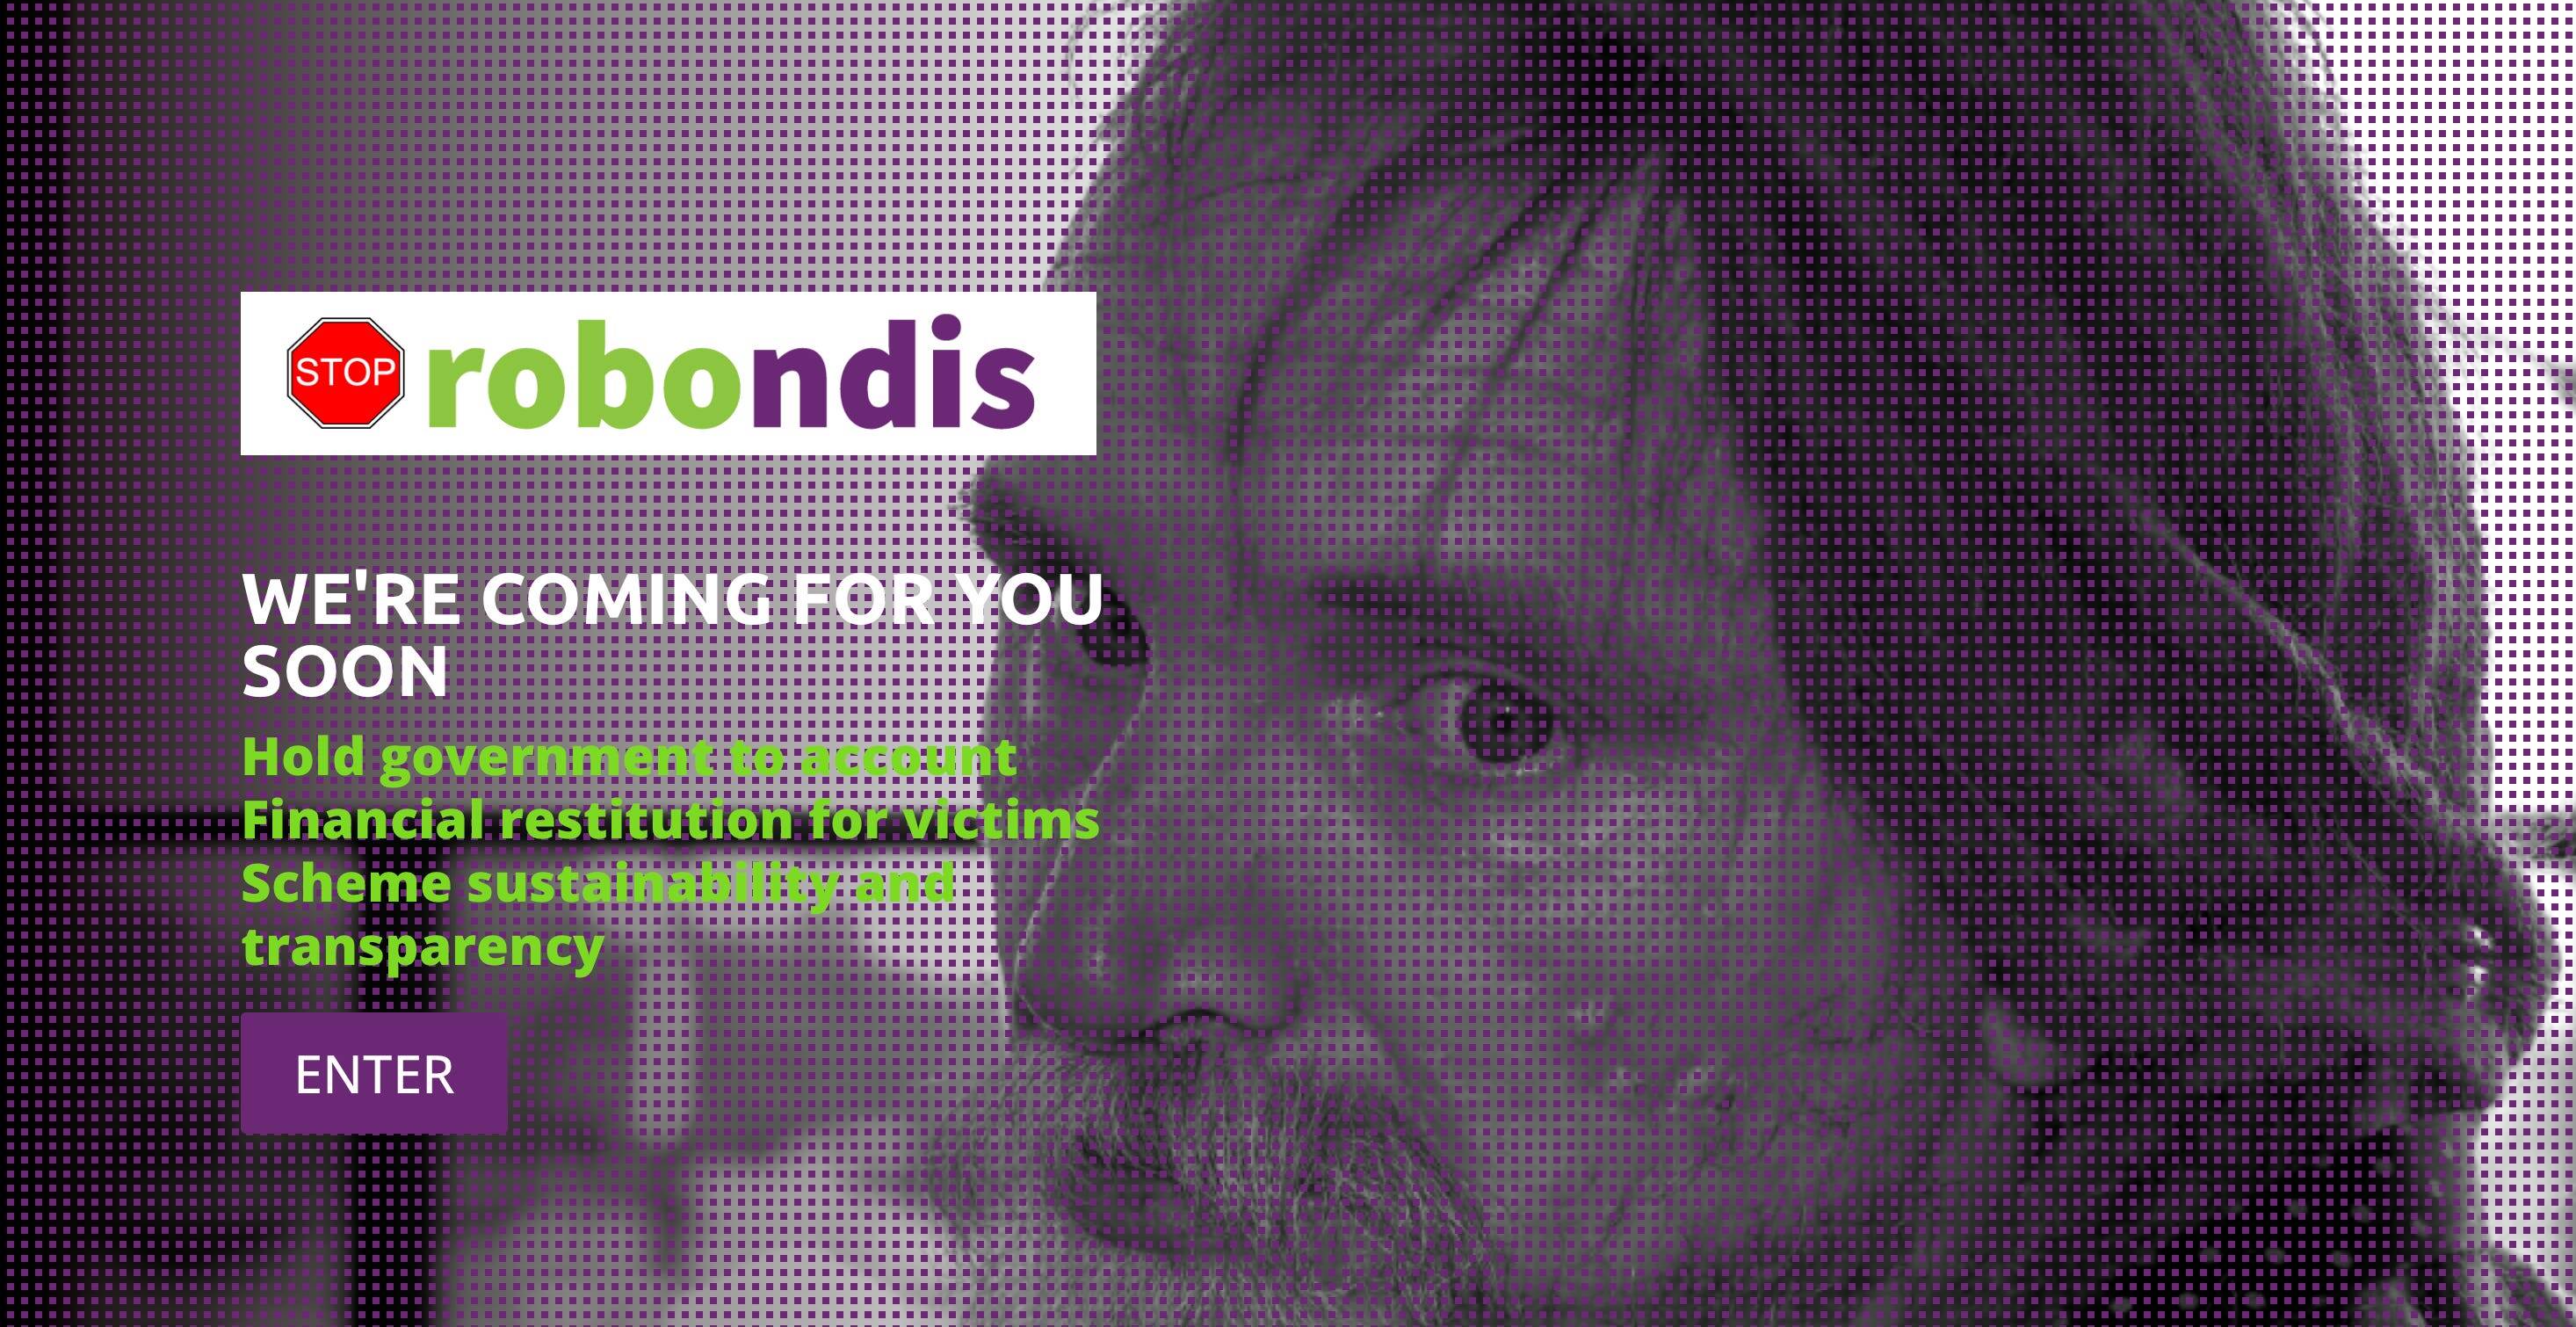 Close up of a man’s face, looking 3/4 to camera, with dreadlocks. Image behind a mesh of purple dots. With logo that reads ‘Stop robondis’  The word ‘stop’ is a red stop sign. The text ‘robo’ is green. The text ‘ndis’ is purple. White text “we’re coming for you”. Green text “hold government to account; financial restitution for victims; scheme sustainability and transparency.”